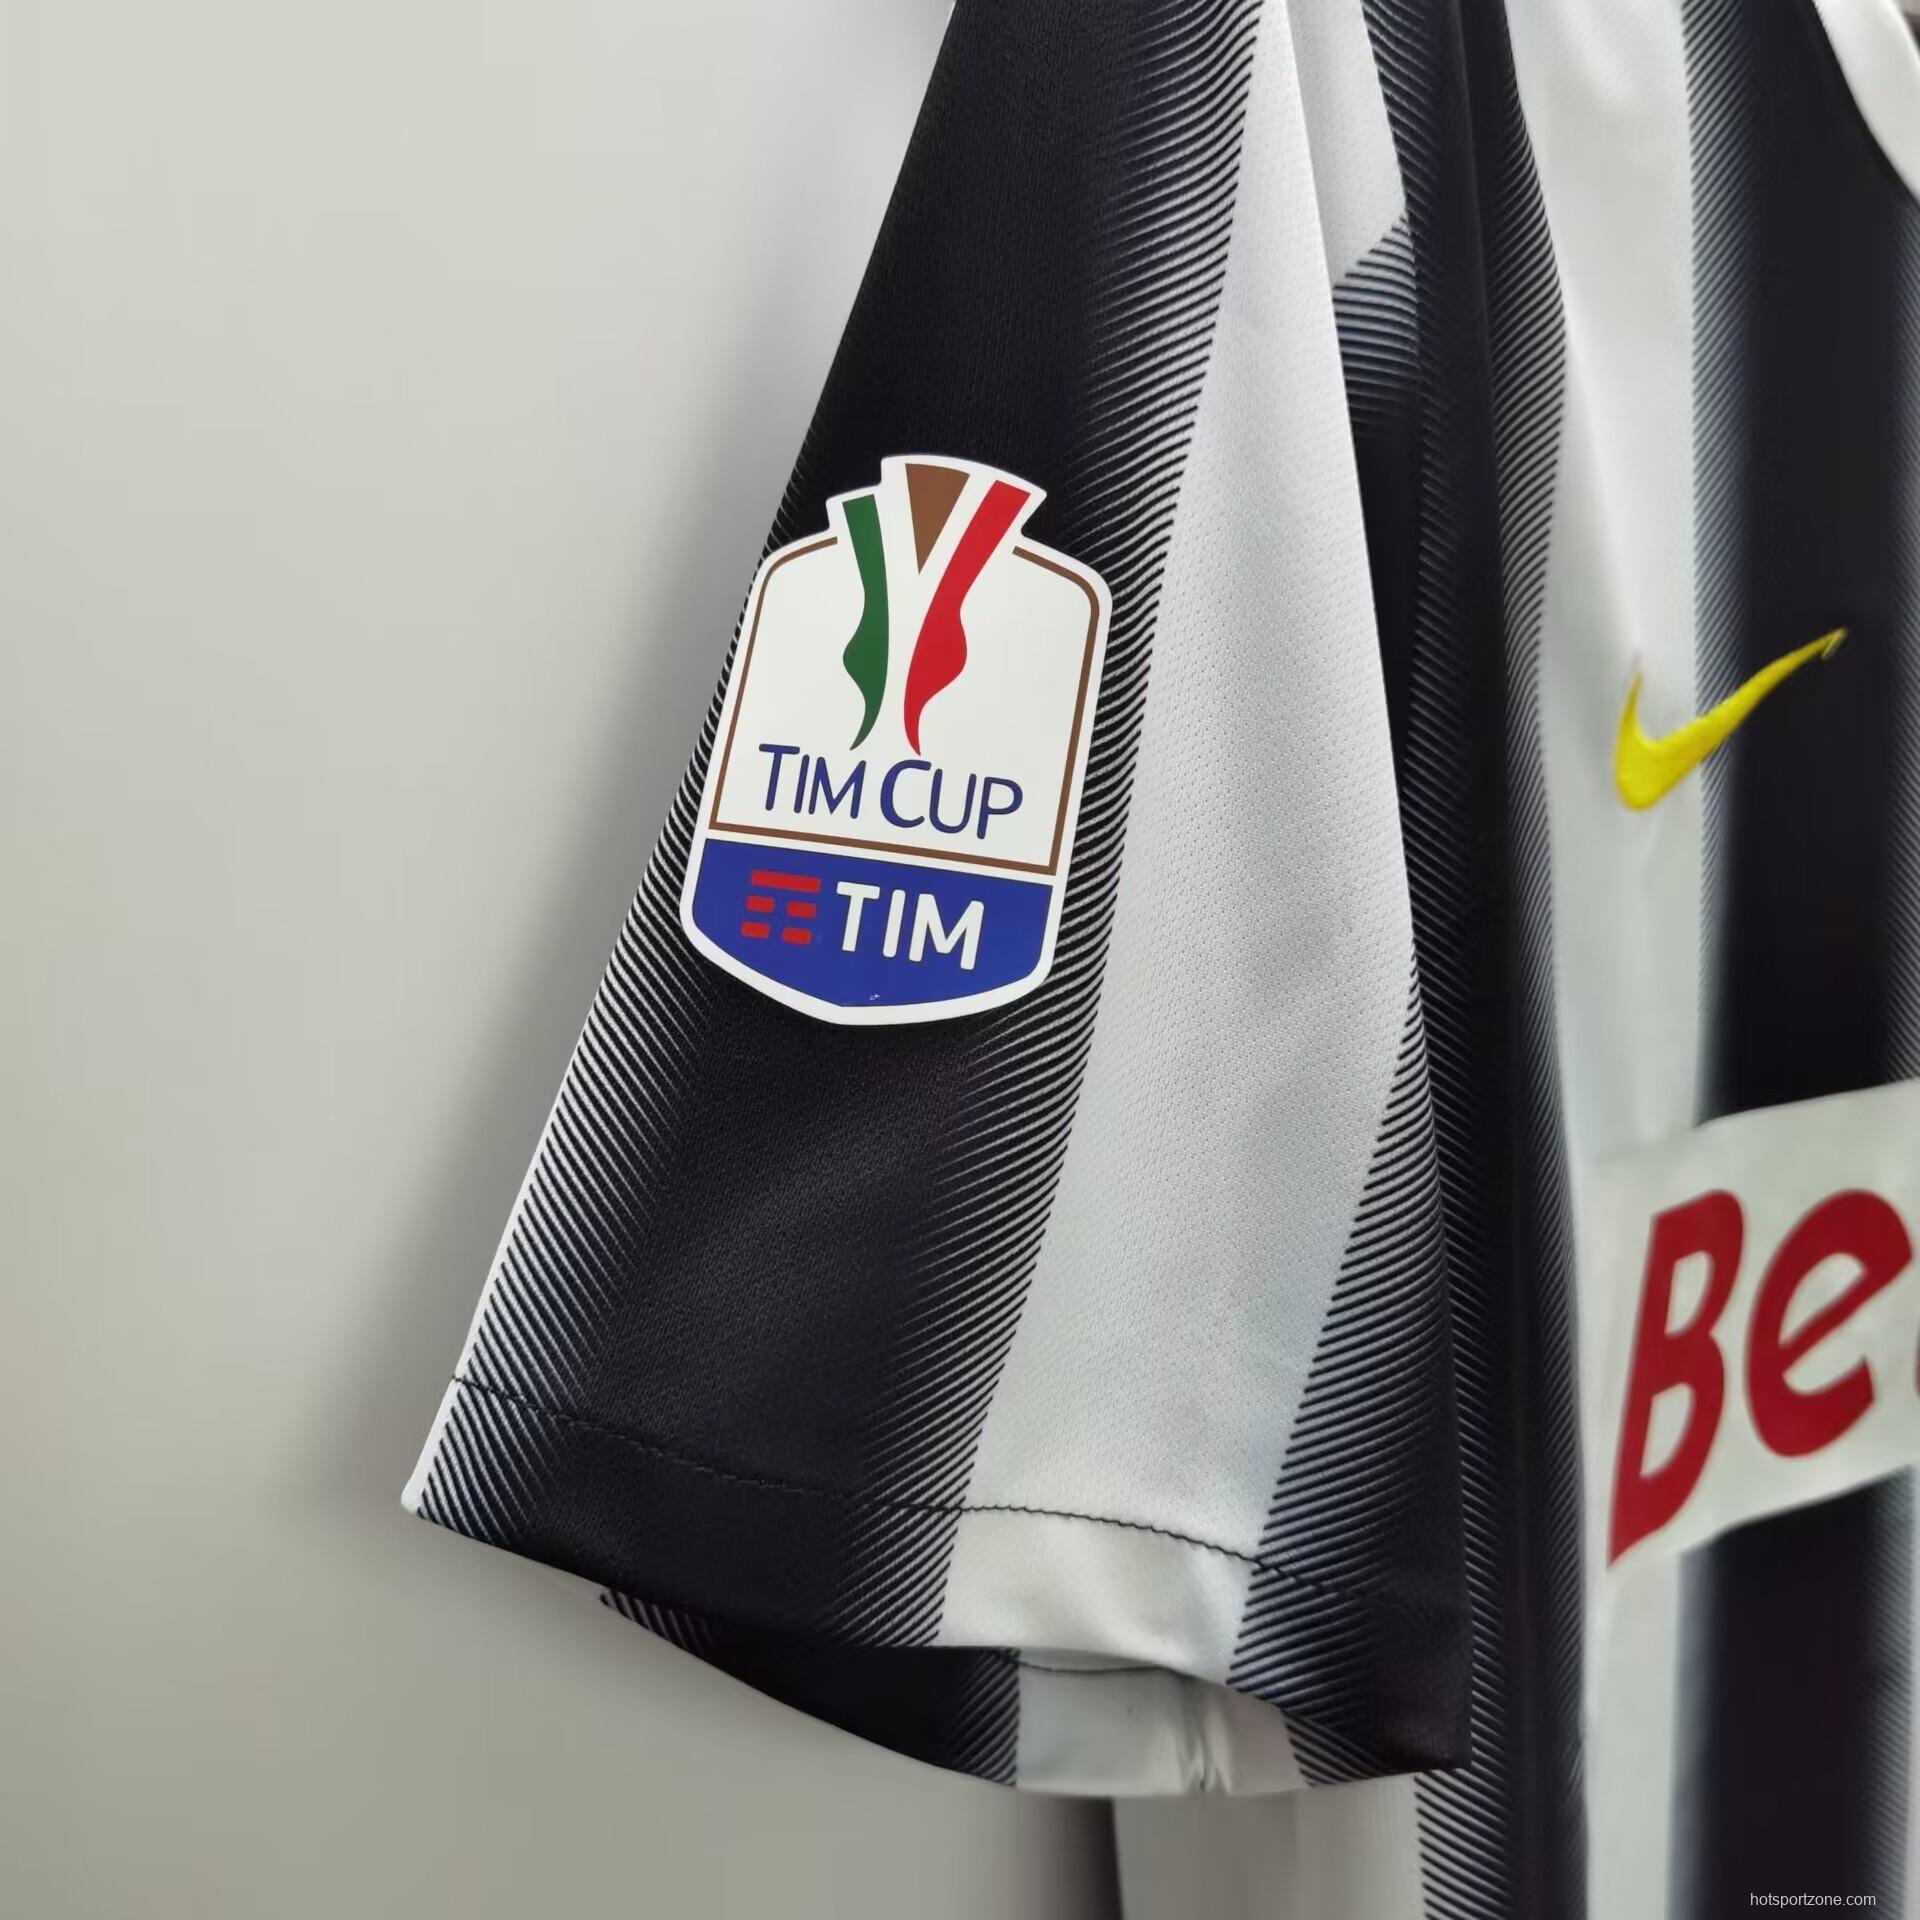 Retro 10/11 Juventus Home Jersey With Full Patches